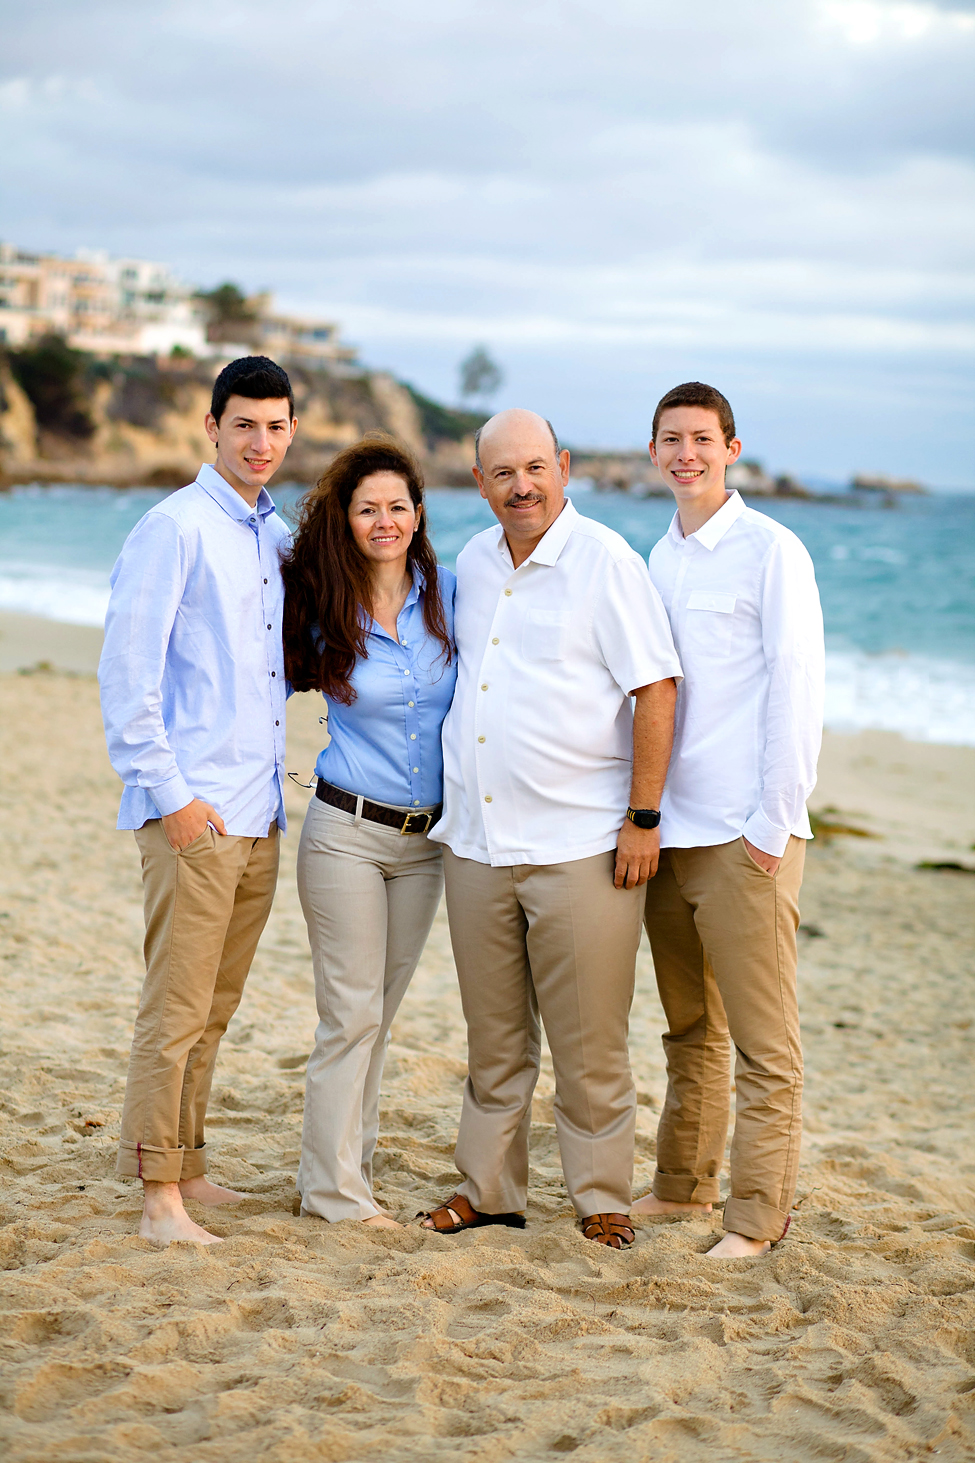 family holiday portraits at the beach